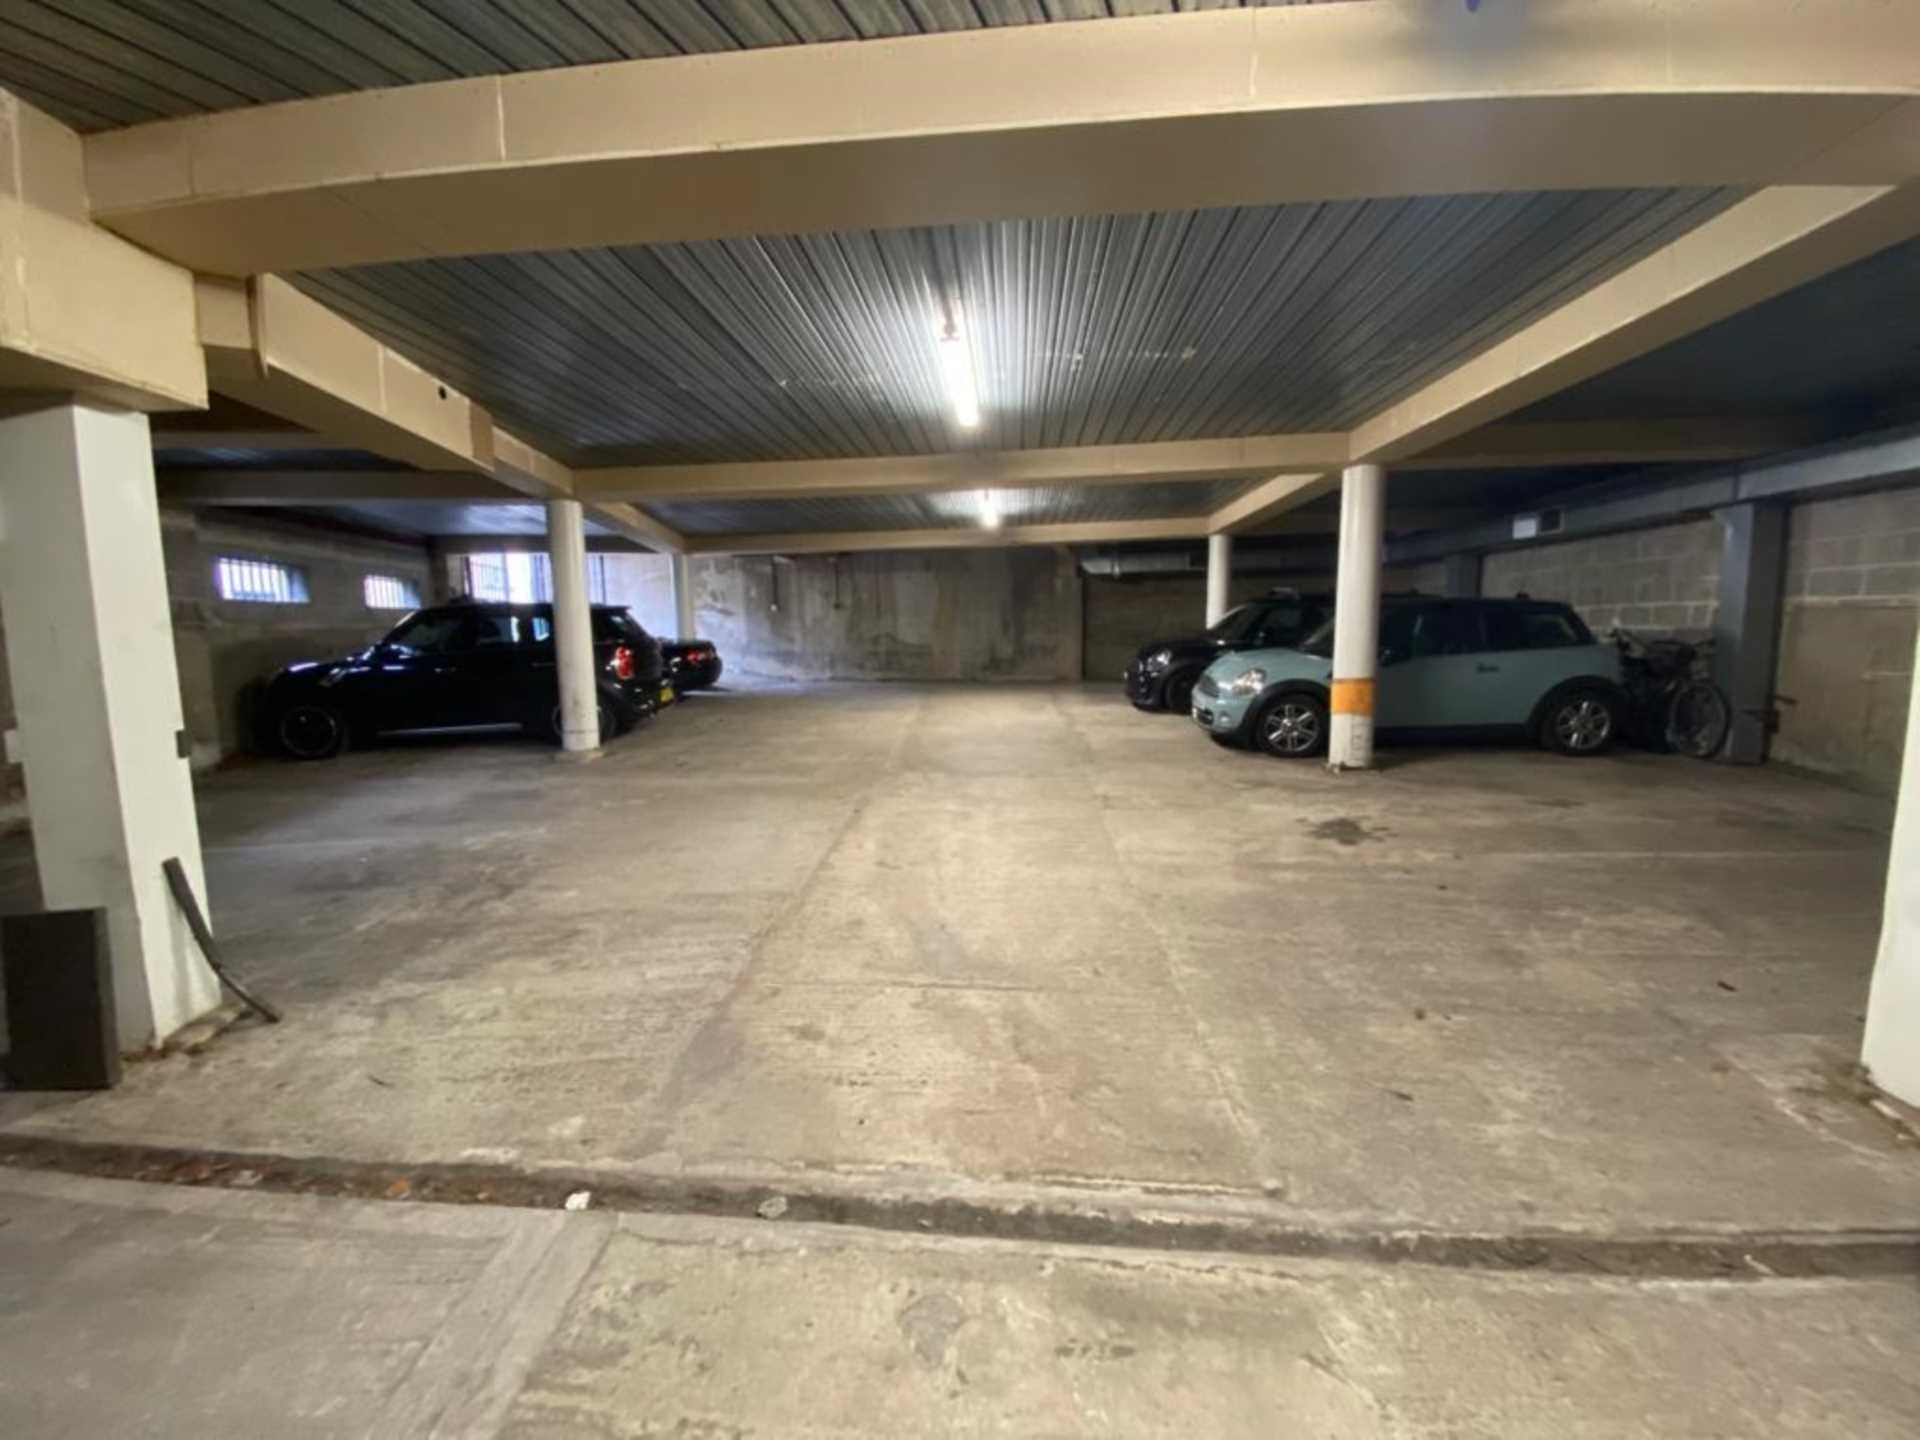 UNDERGROUND PARKING SPACE IN CIRCUS PLACE, Image 8